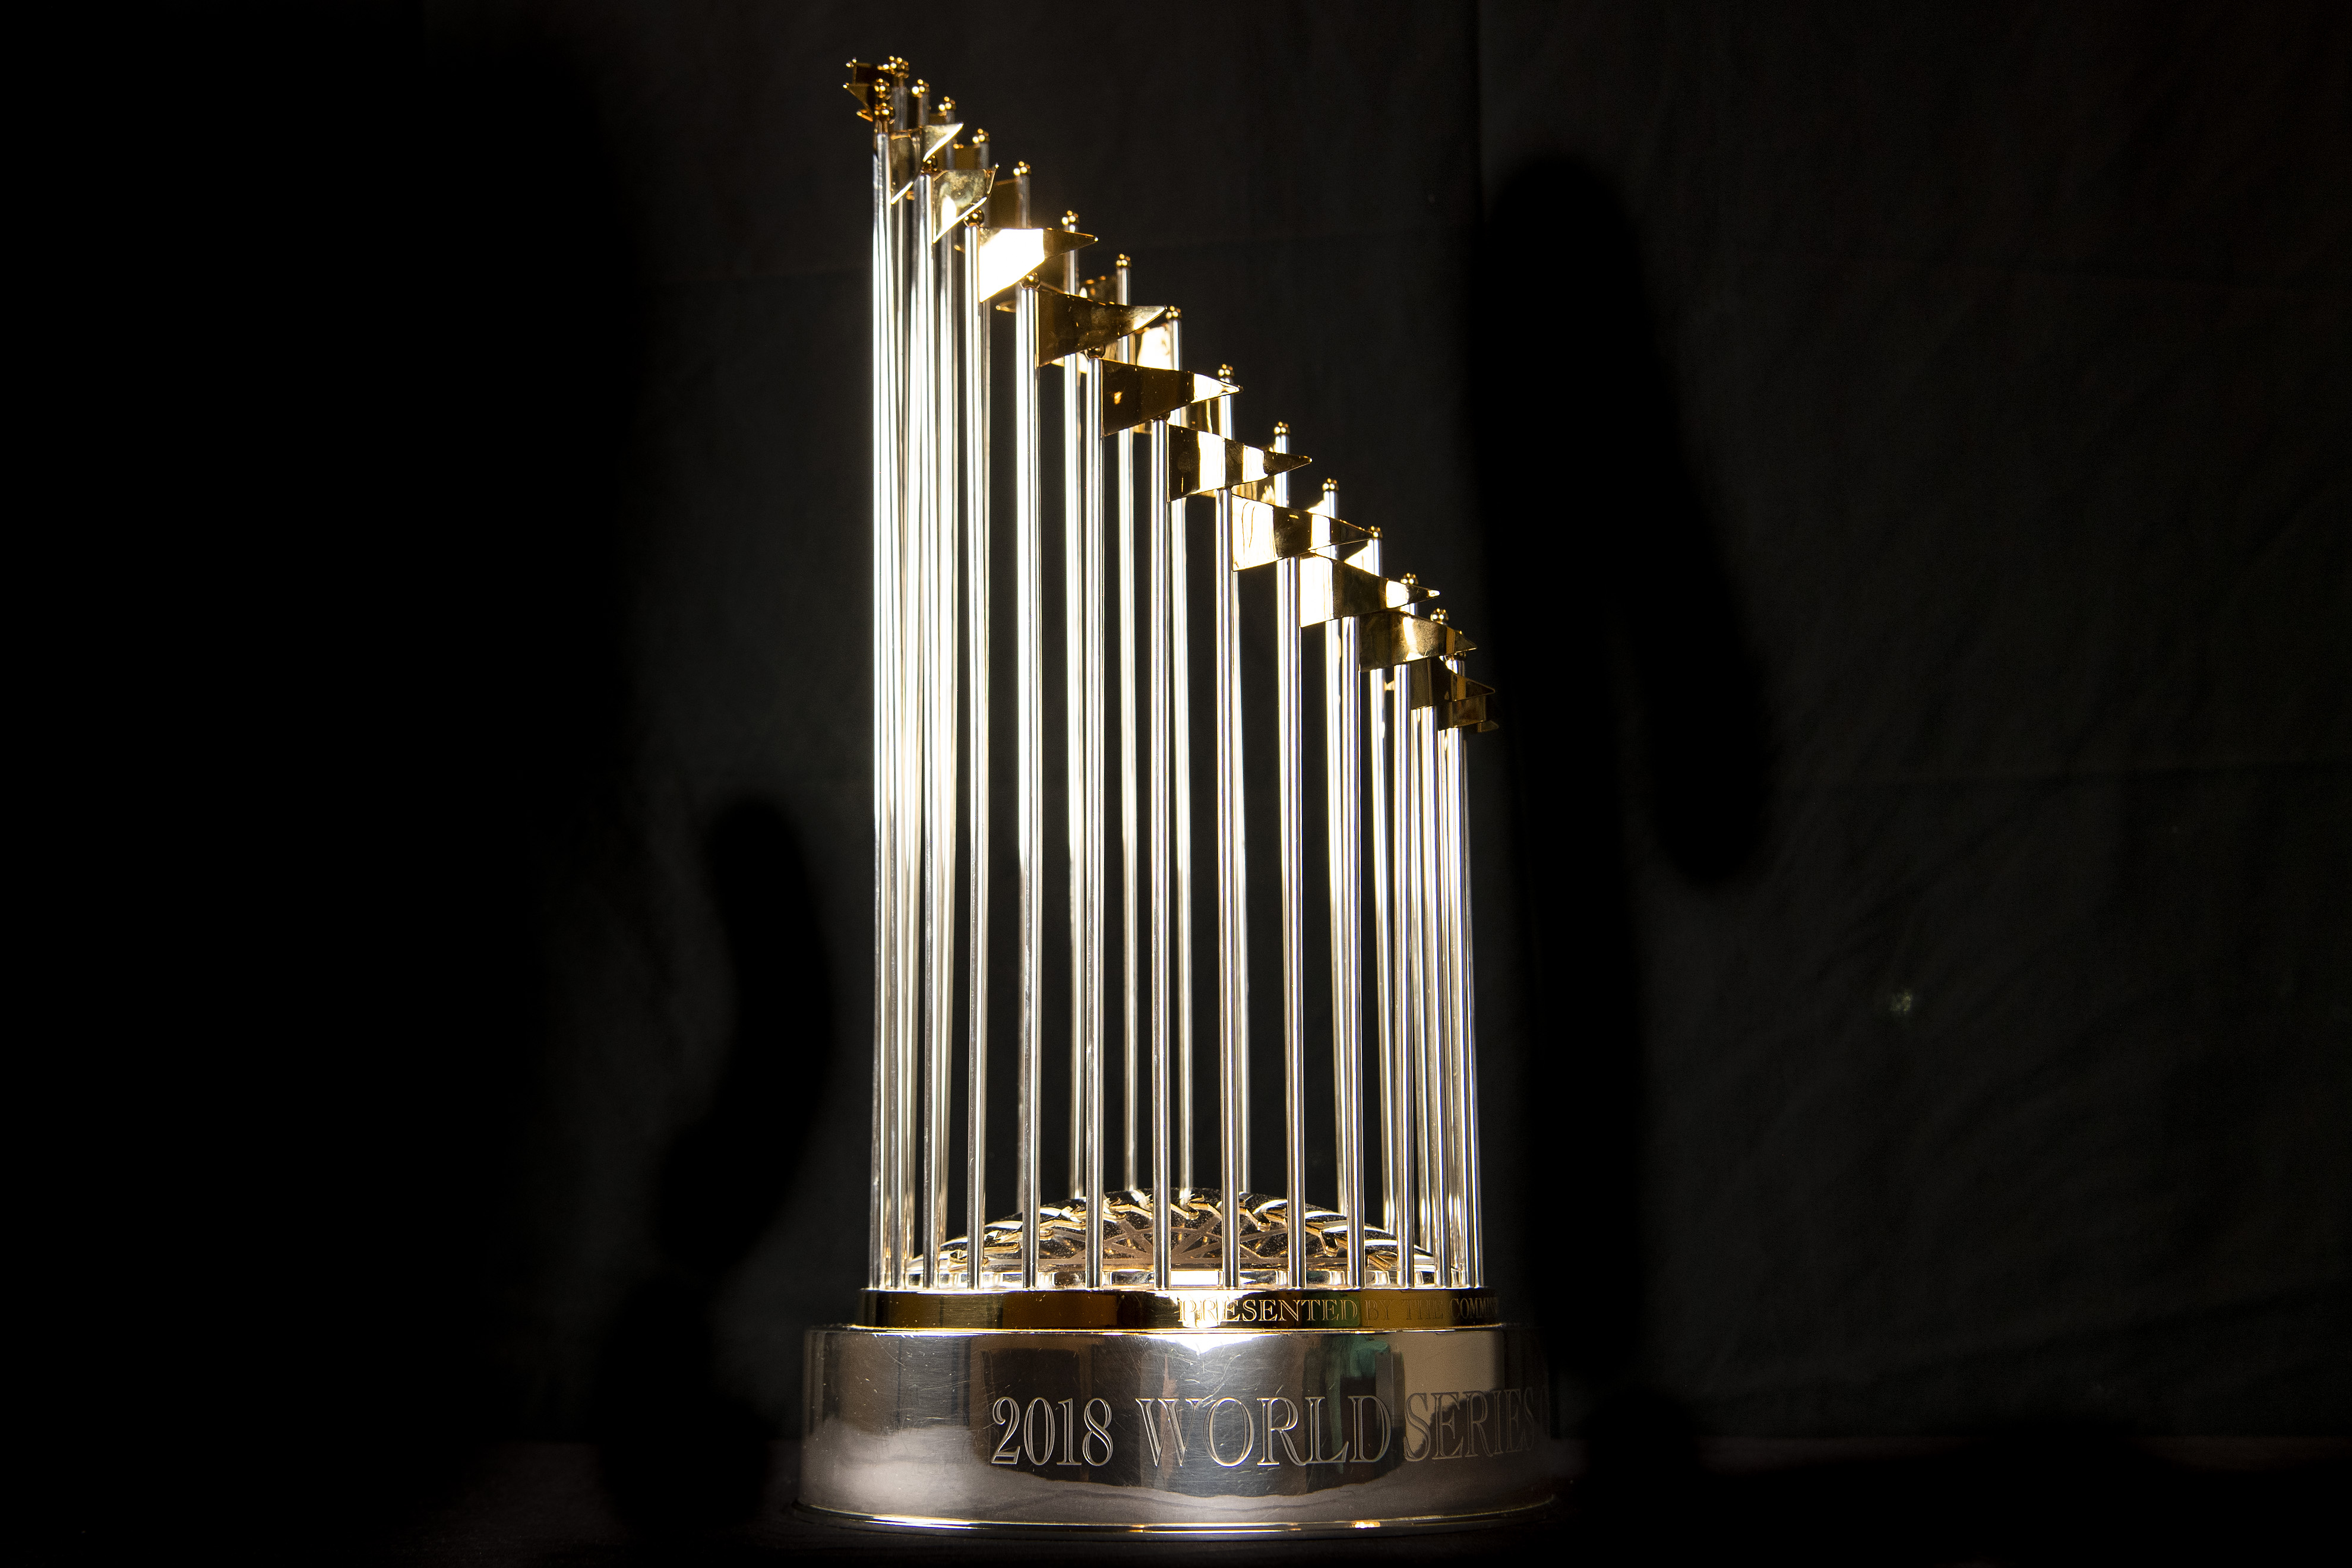 Red Sox World Series trophy coming to Island